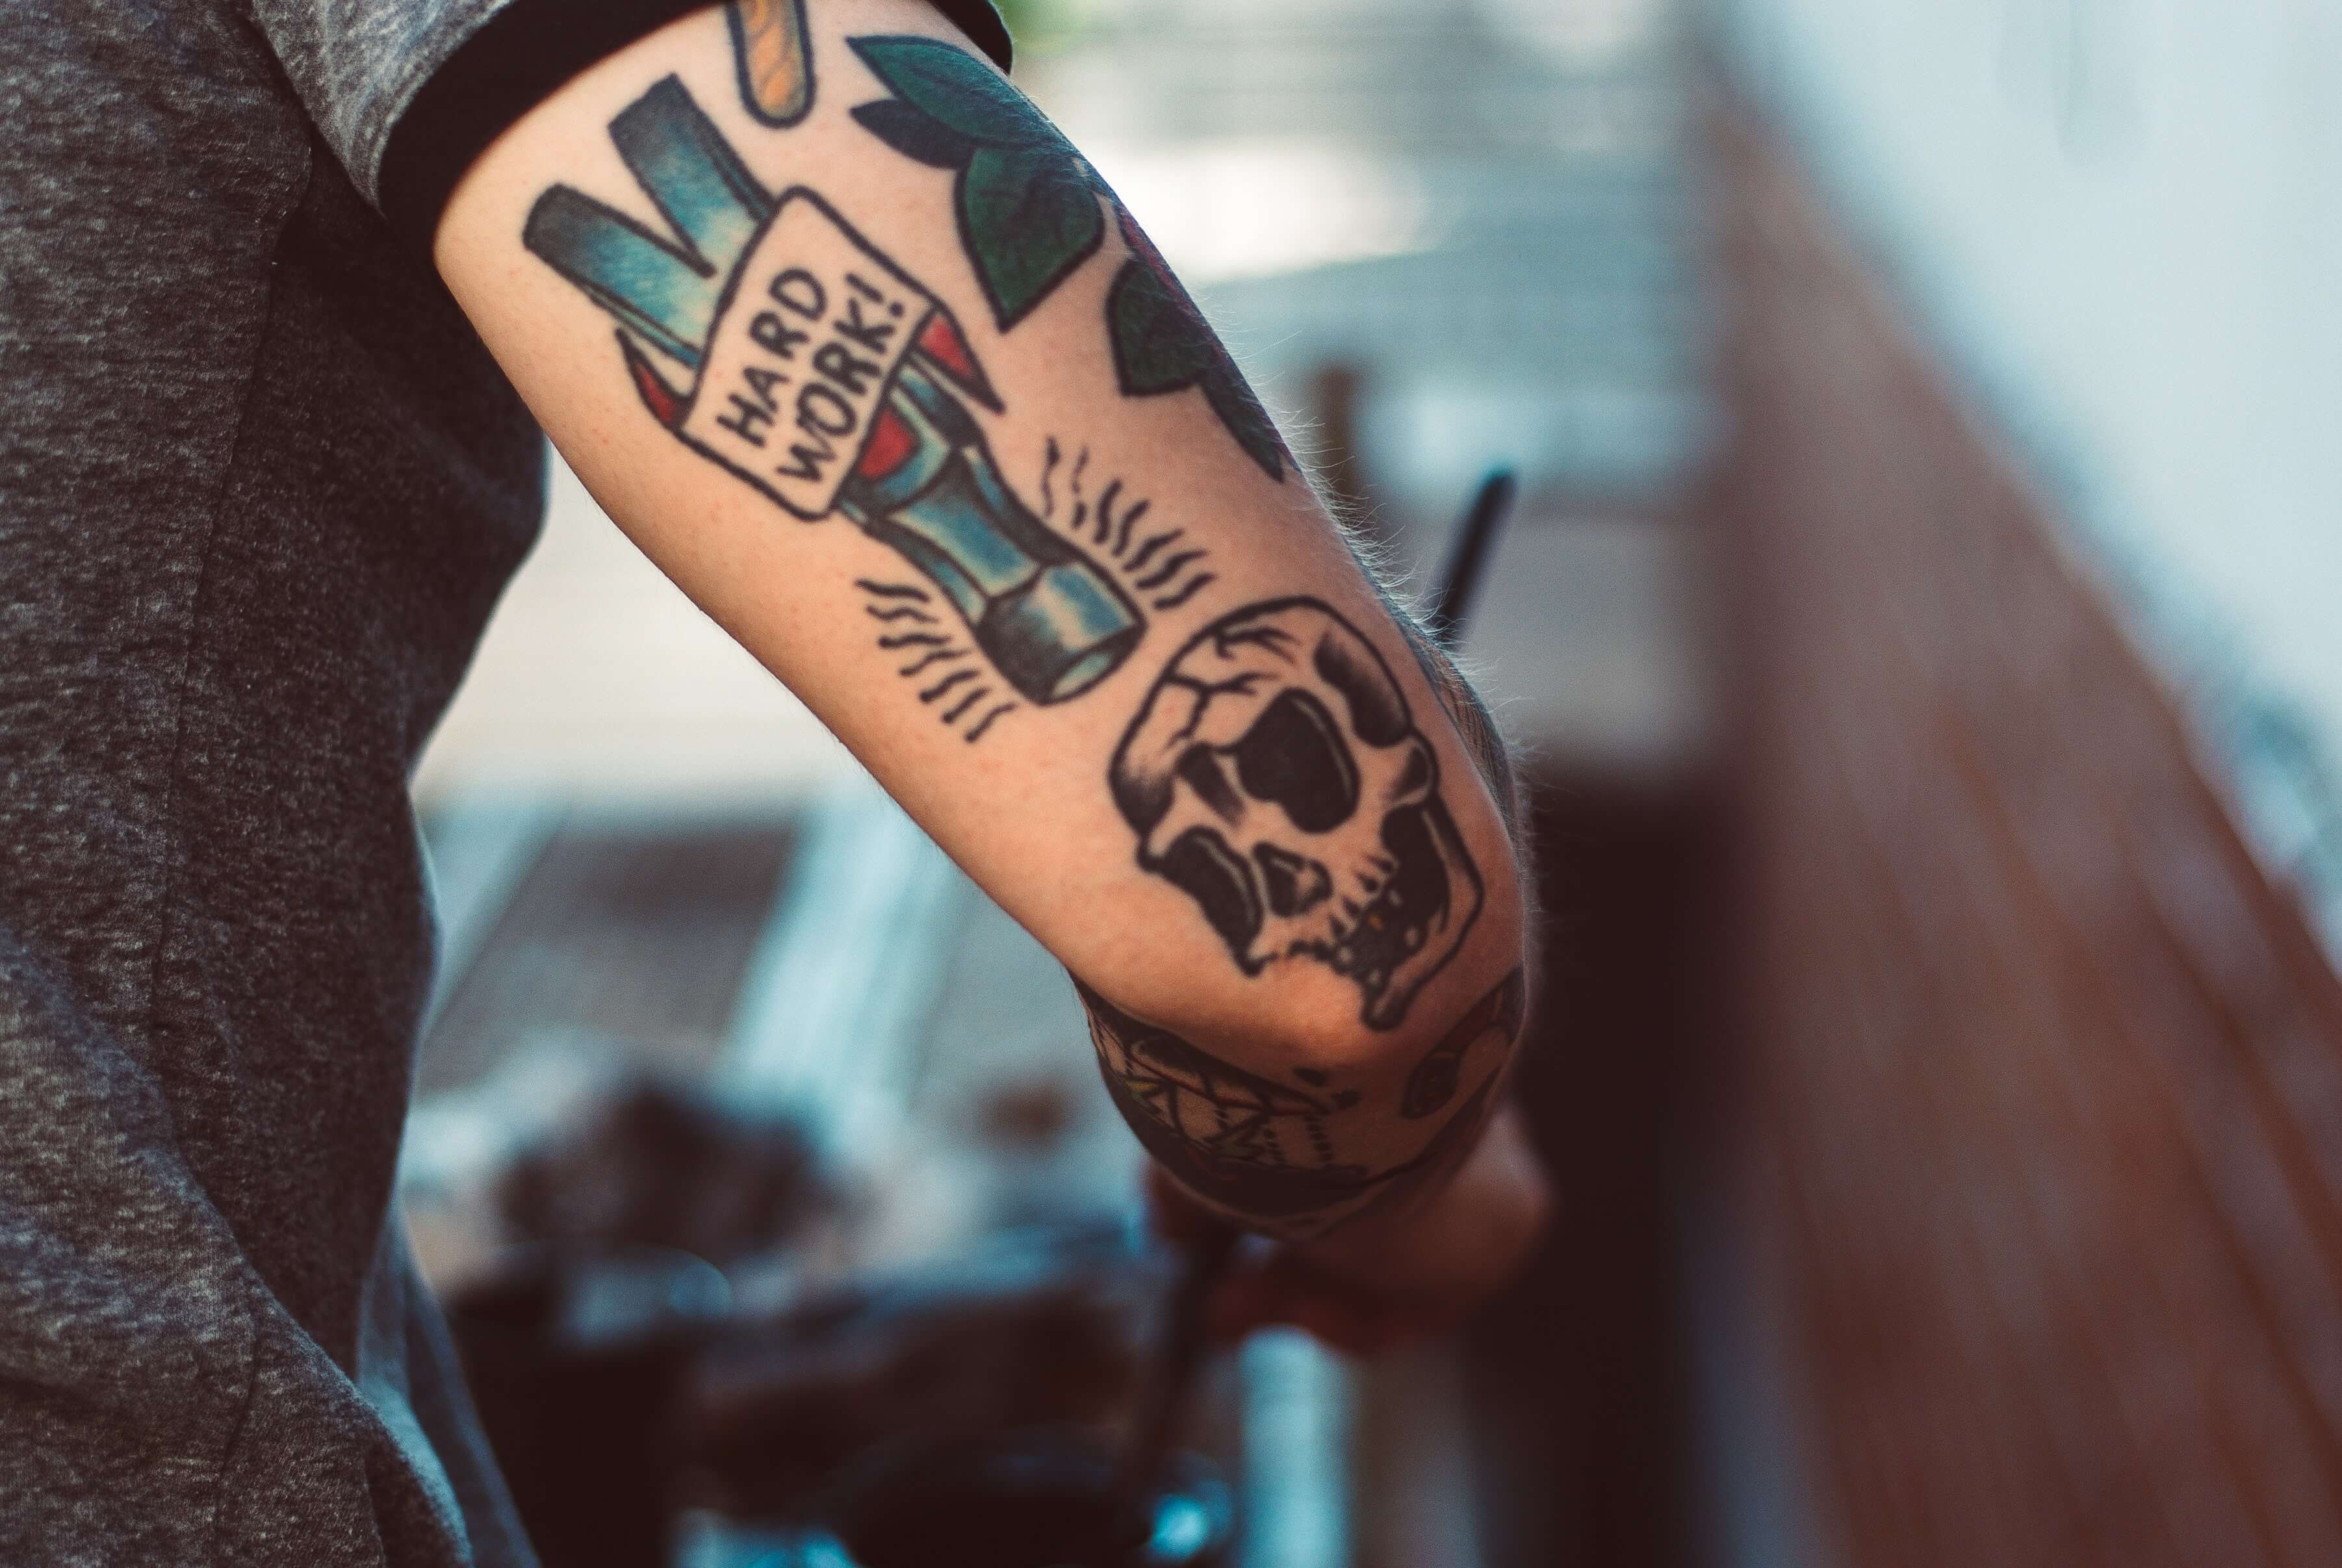 Colorful tattoo of a skull